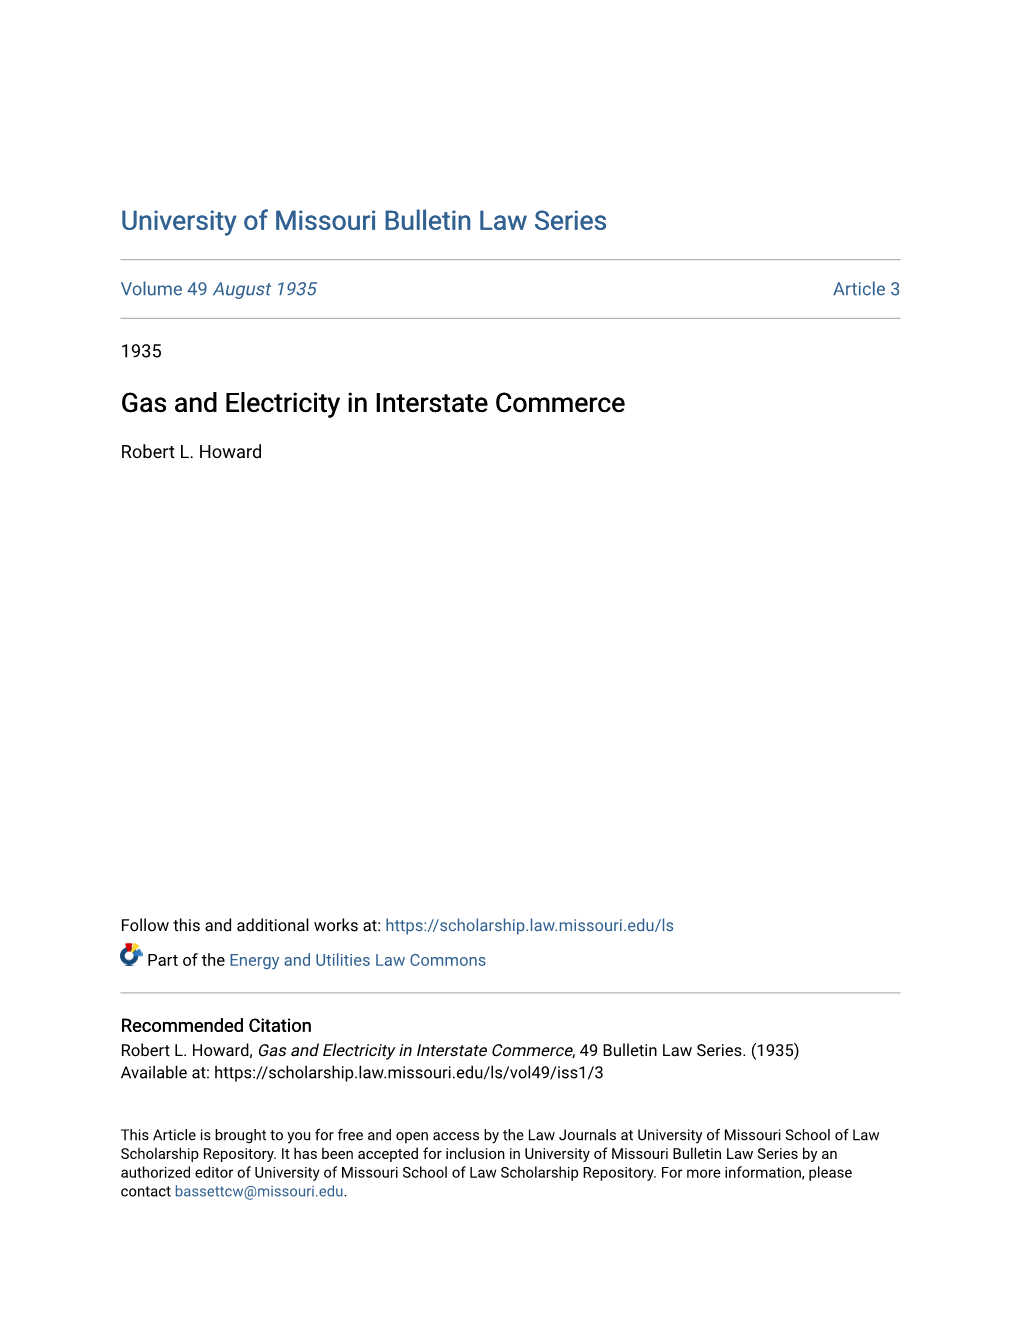 Gas and Electricity in Interstate Commerce